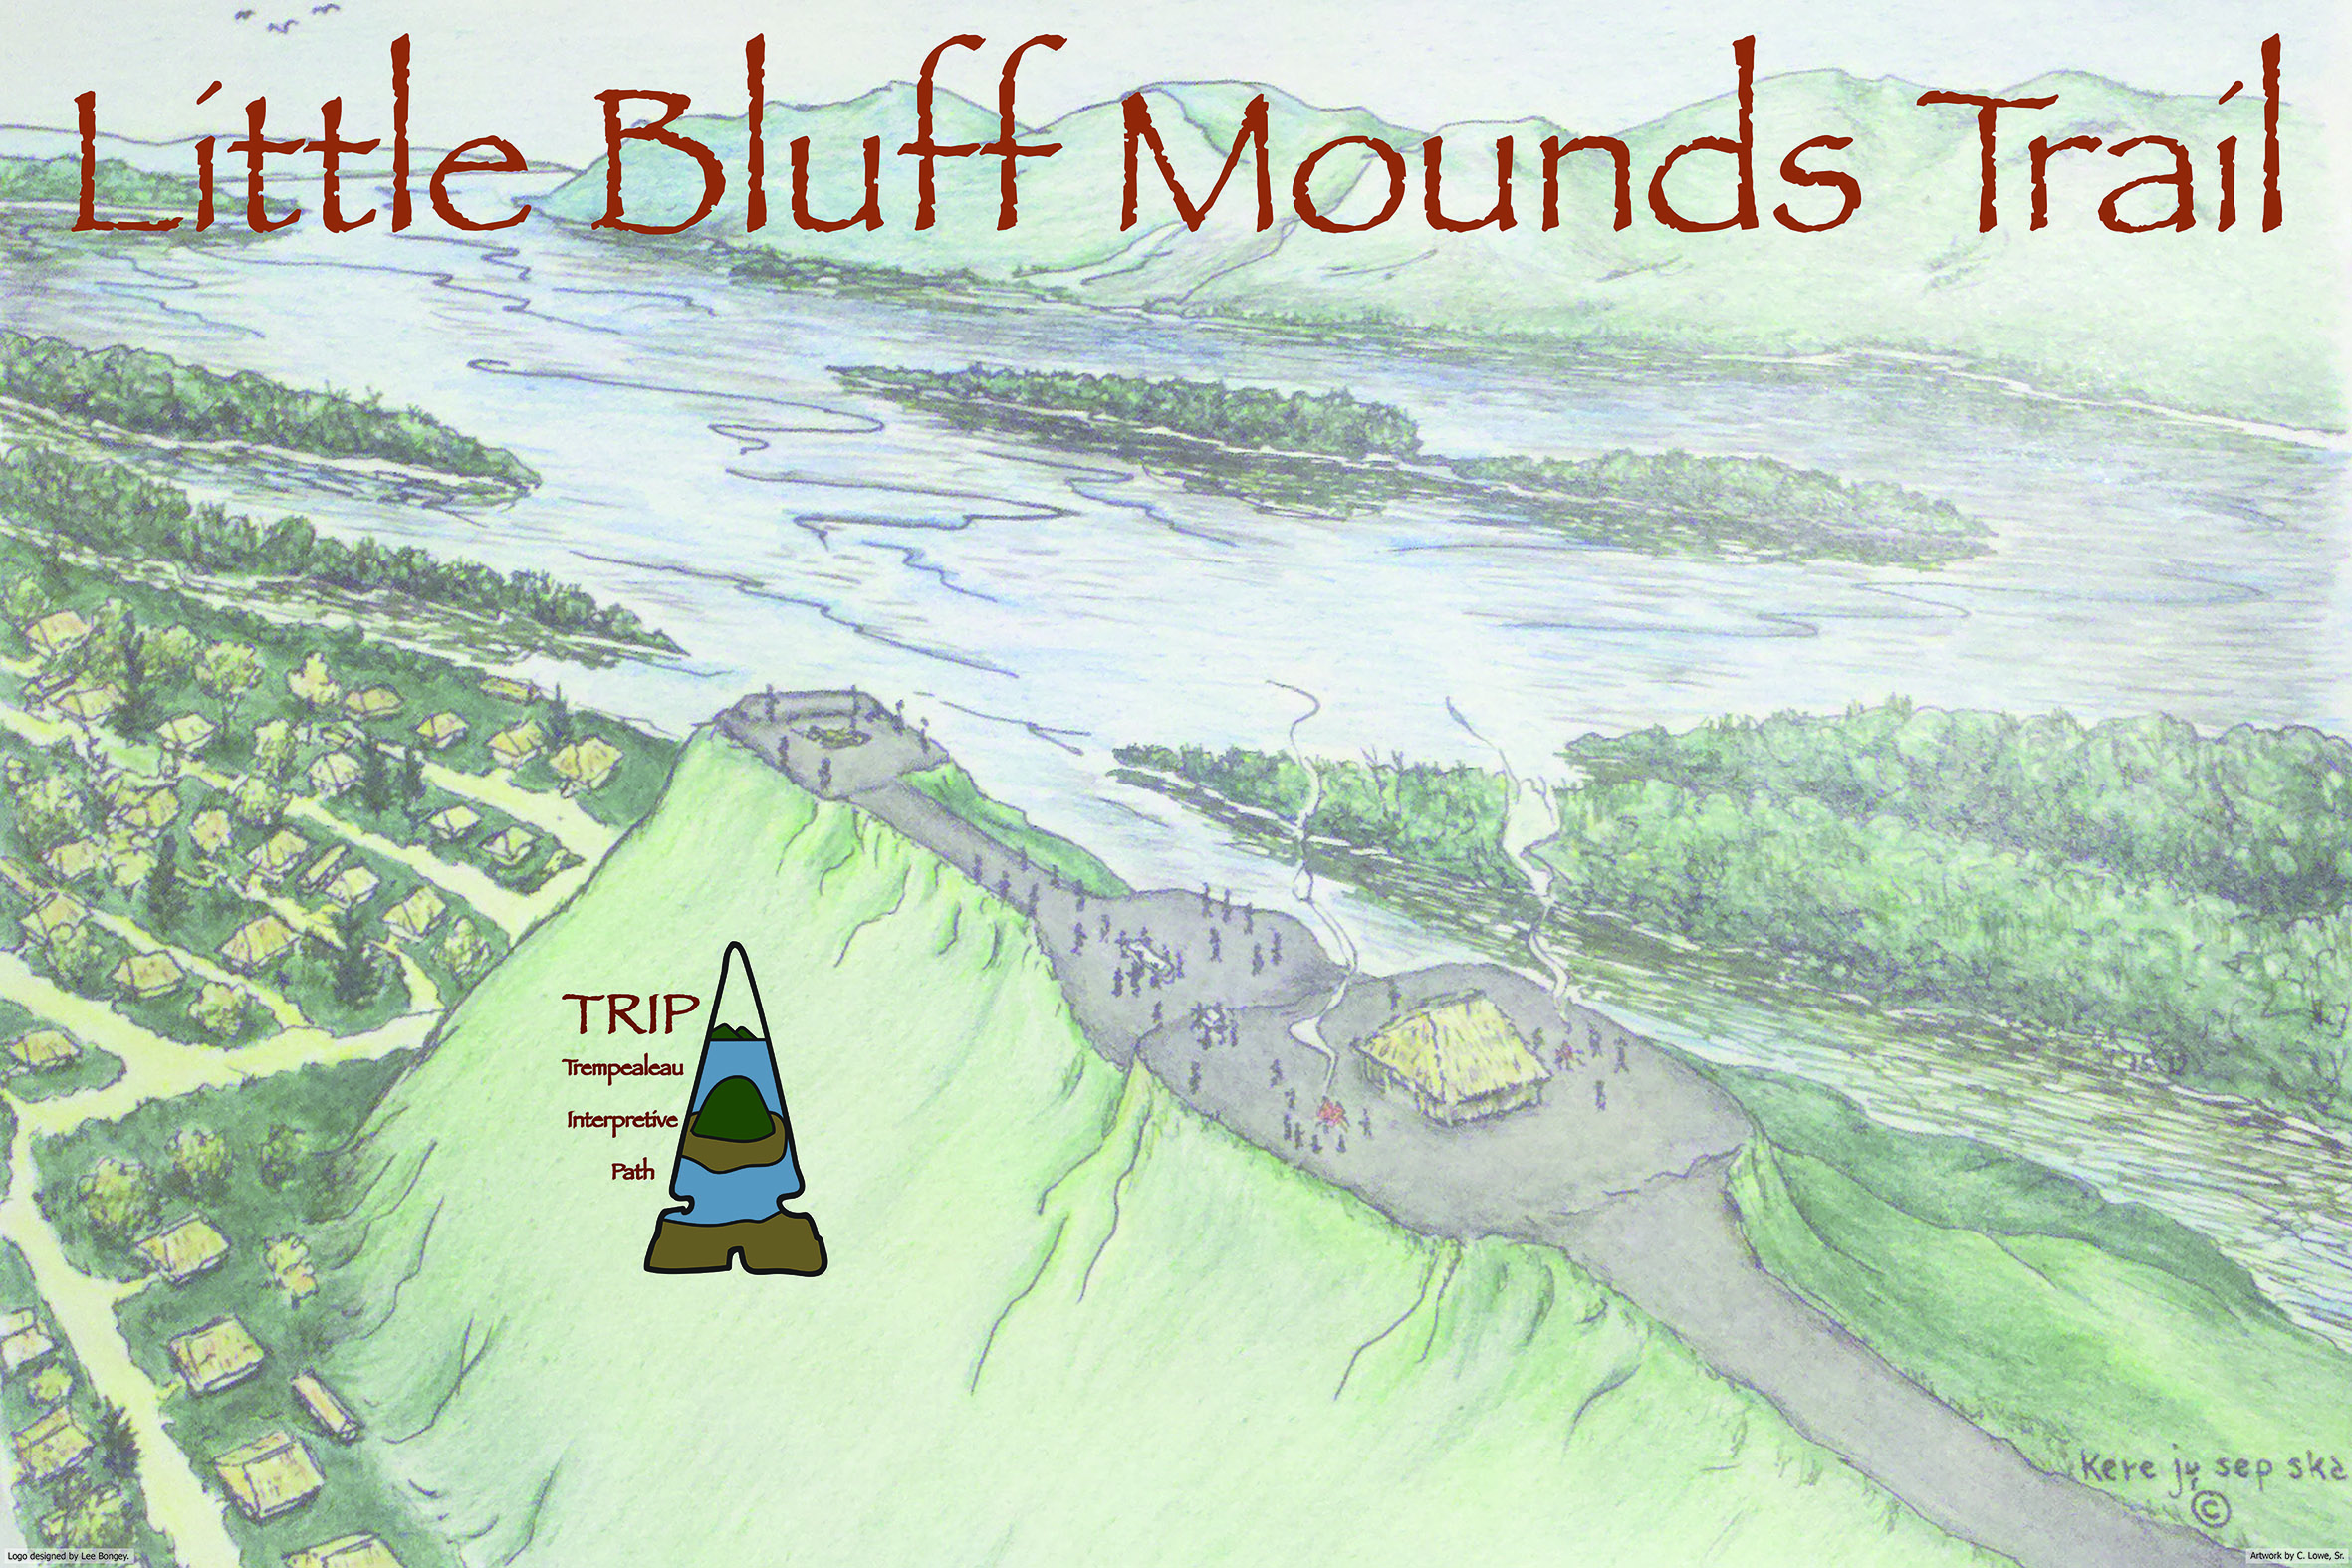 Welcome to Little Bluff Mounds Trail